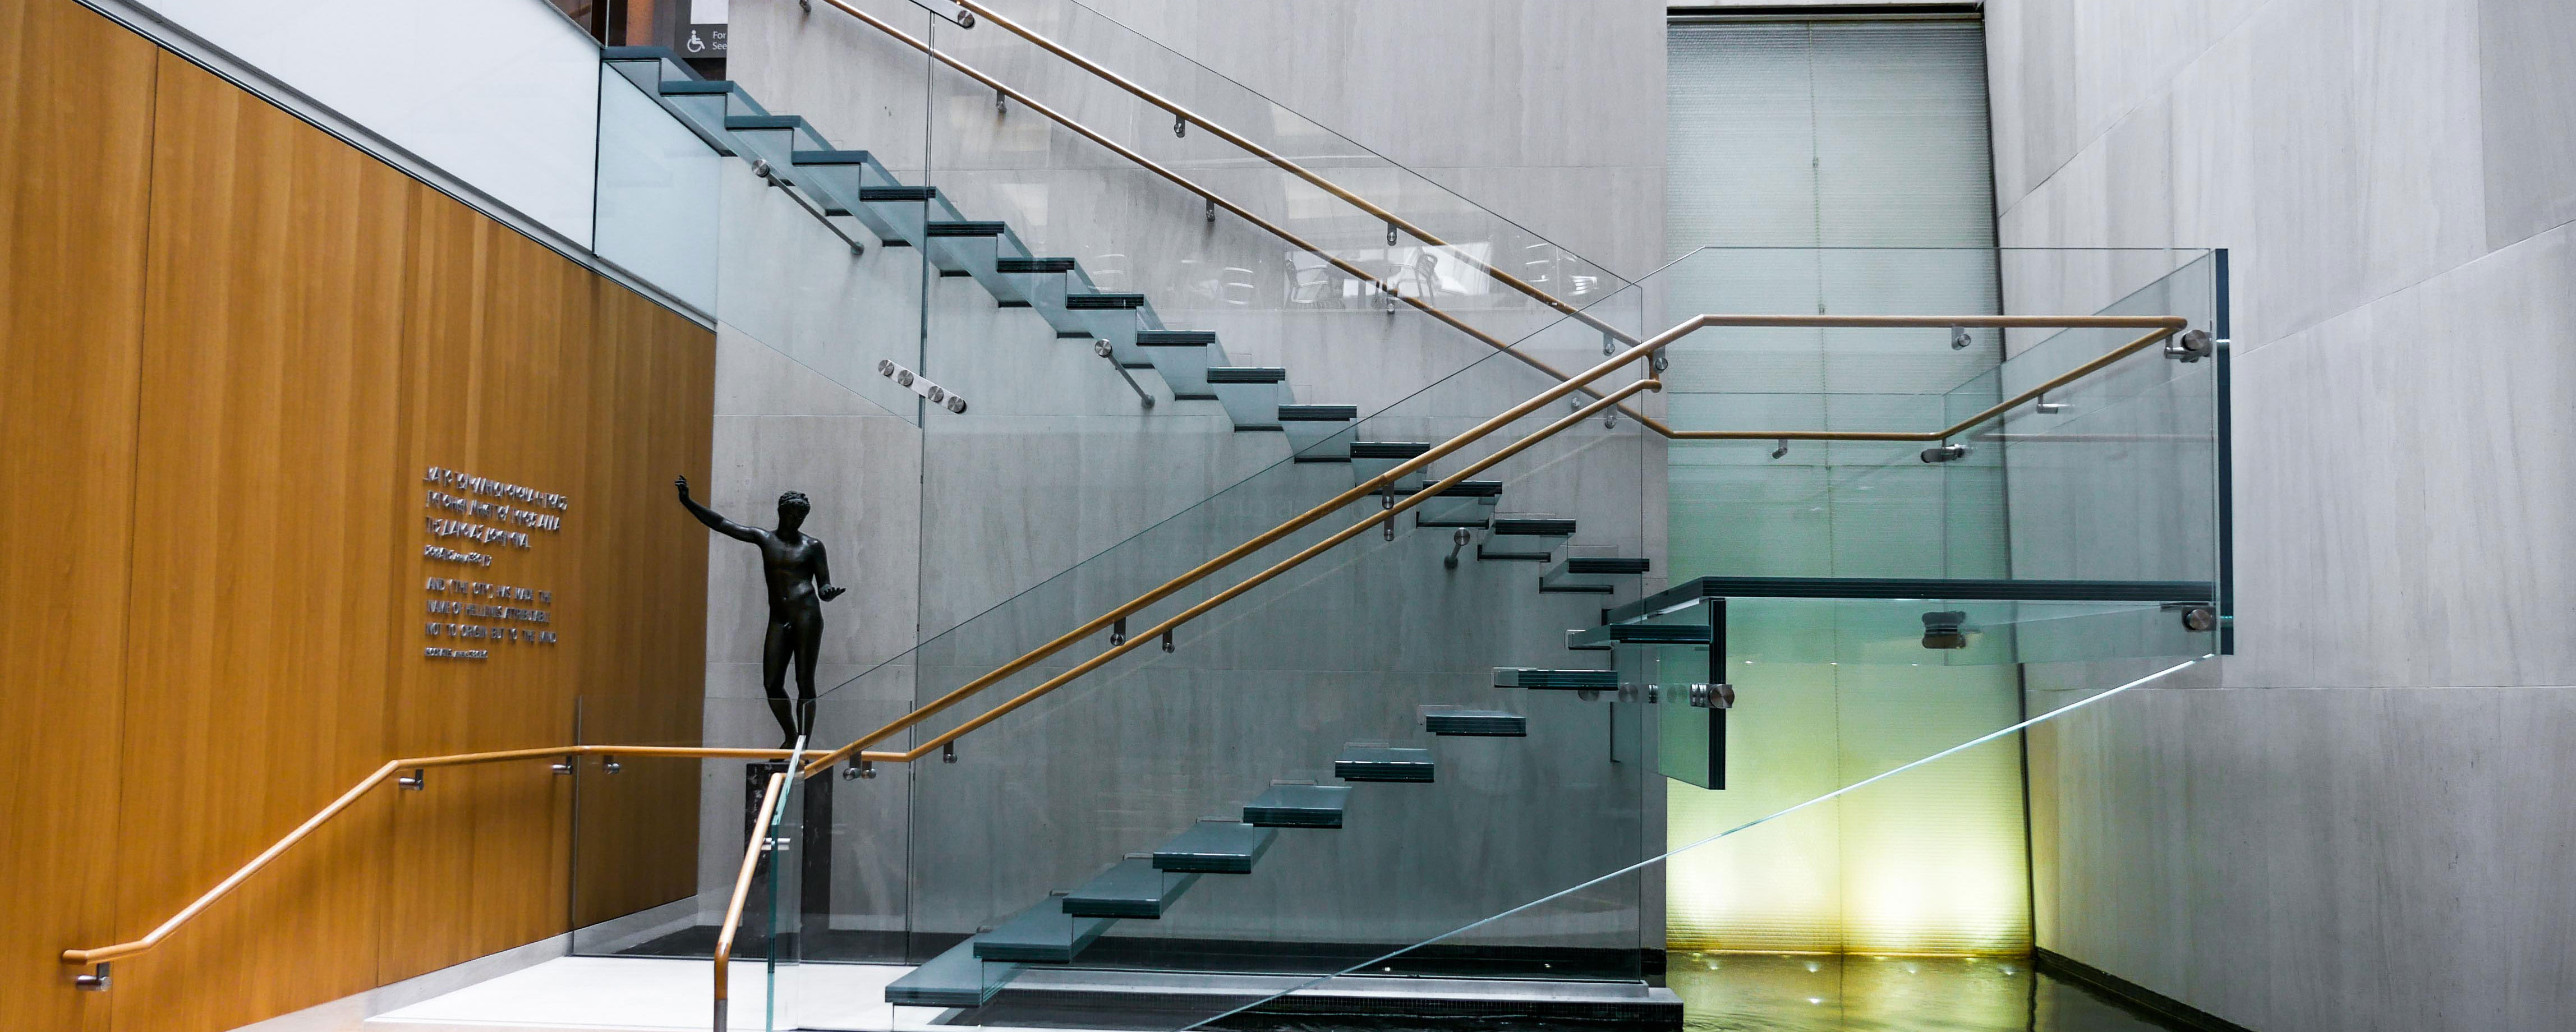 THREE REASONS THIS ALL-GLASS STAIRCASE IS WORLD-CLASS